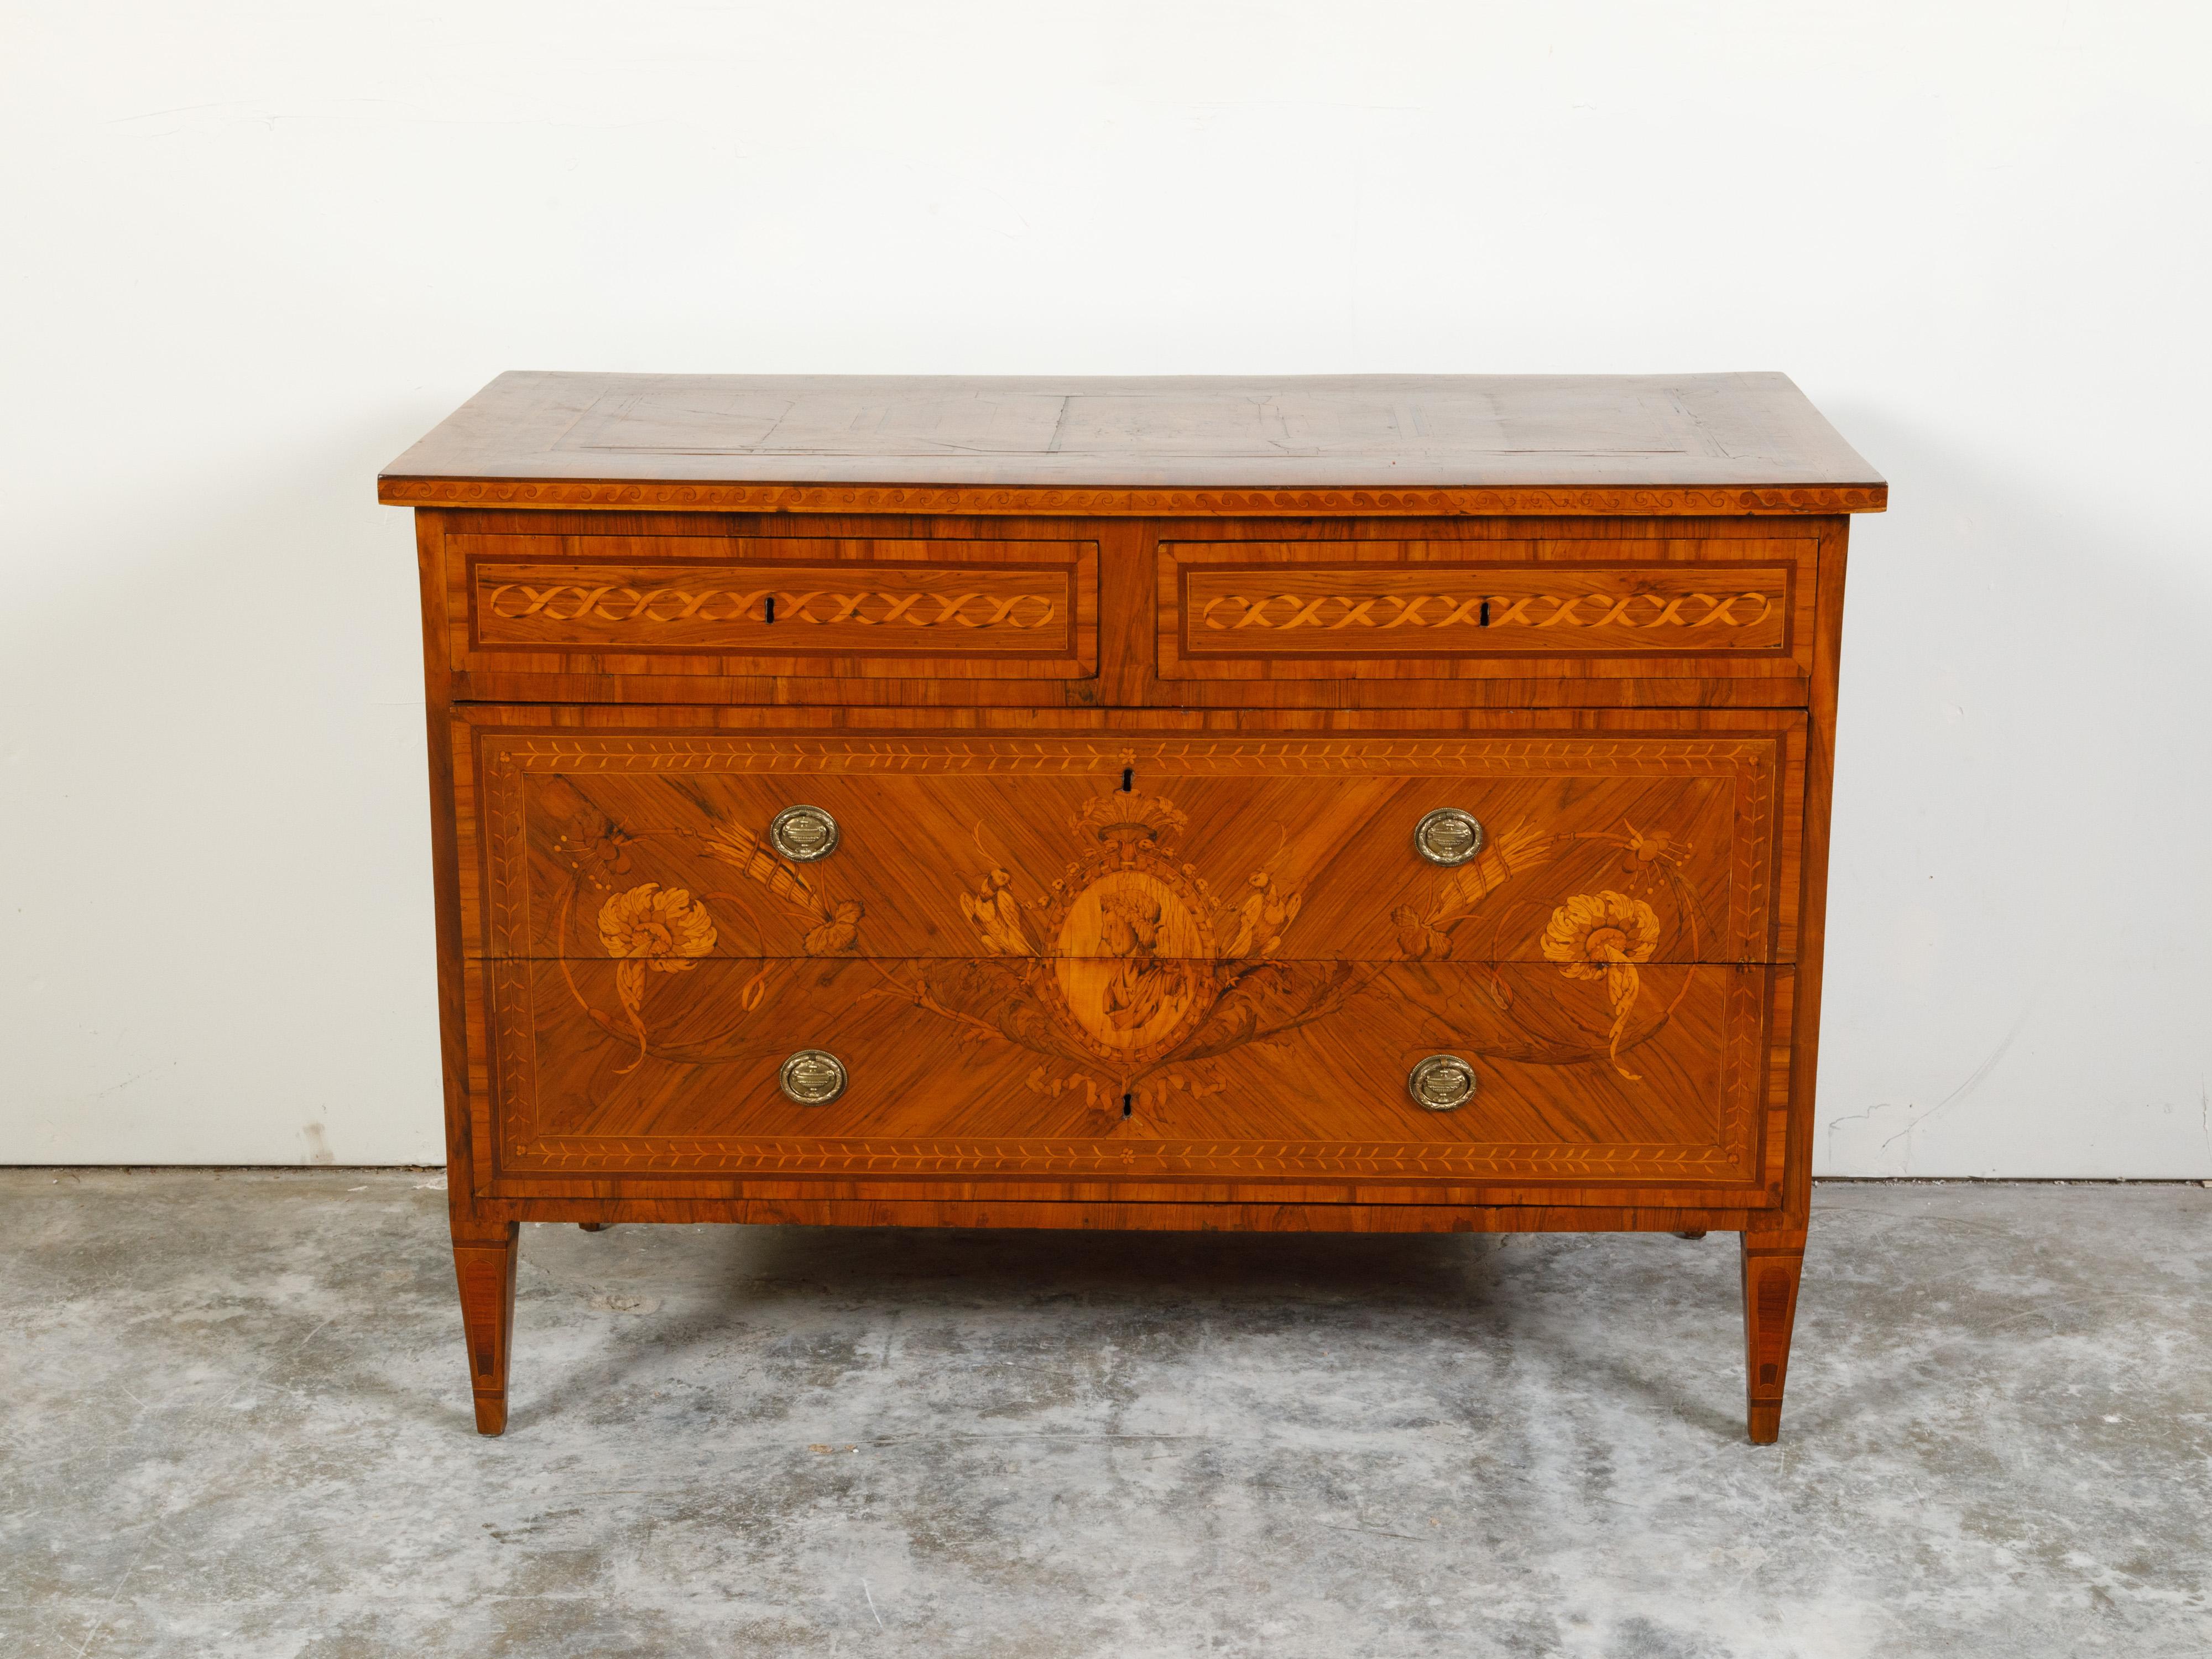 An Italian neoclassical period fruitwood commode from the early 19th century, with four drawers and marquetry décor. Created in Italy during the early years of the 19th century, this neoclassical chest features a rectangular top with marquetry décor